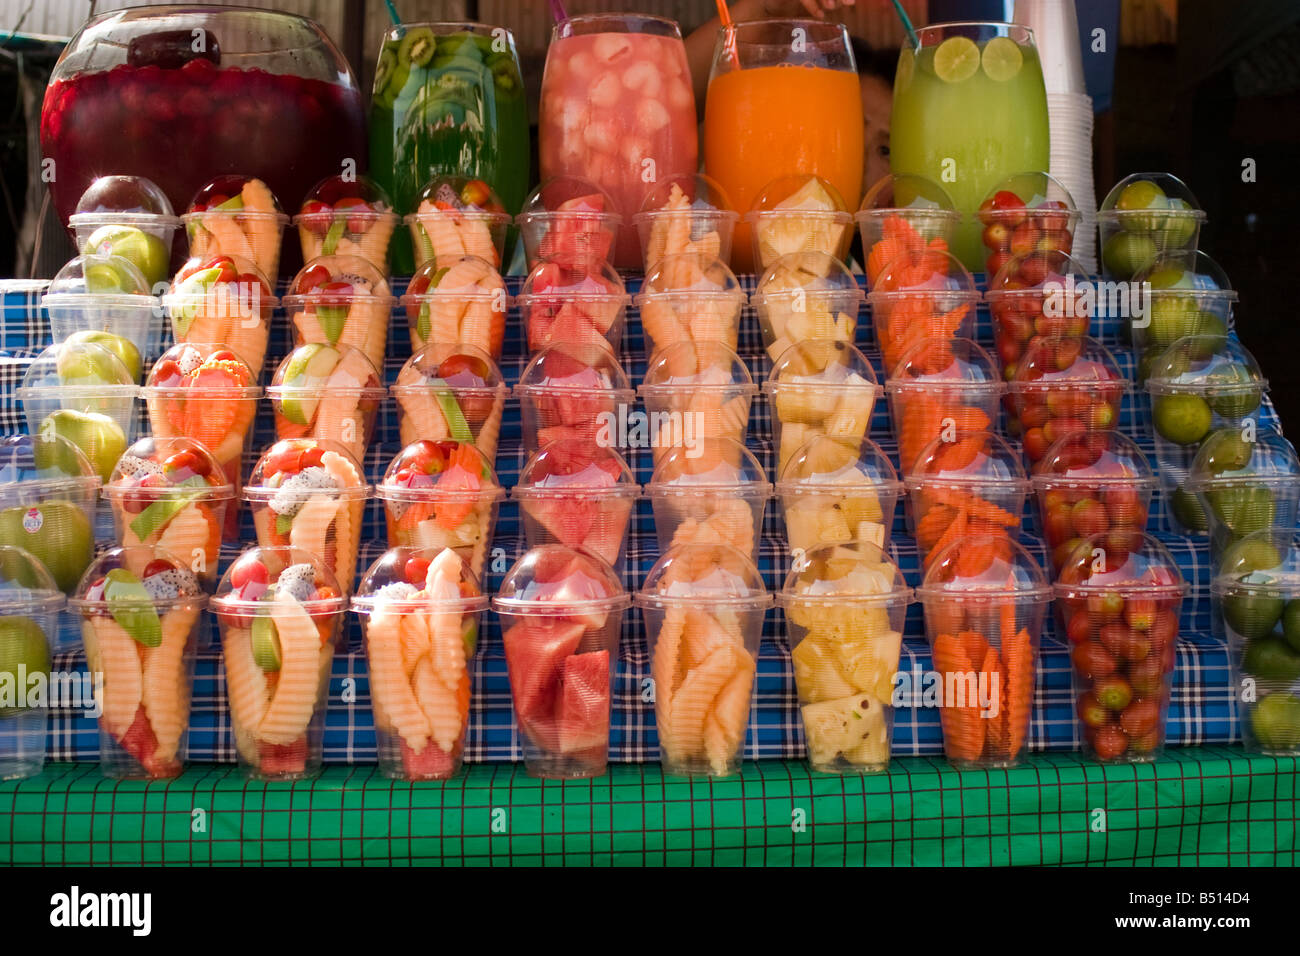 Pots of fruits are neatly lined up for sale at a market stall in Bangkok Stock Photo